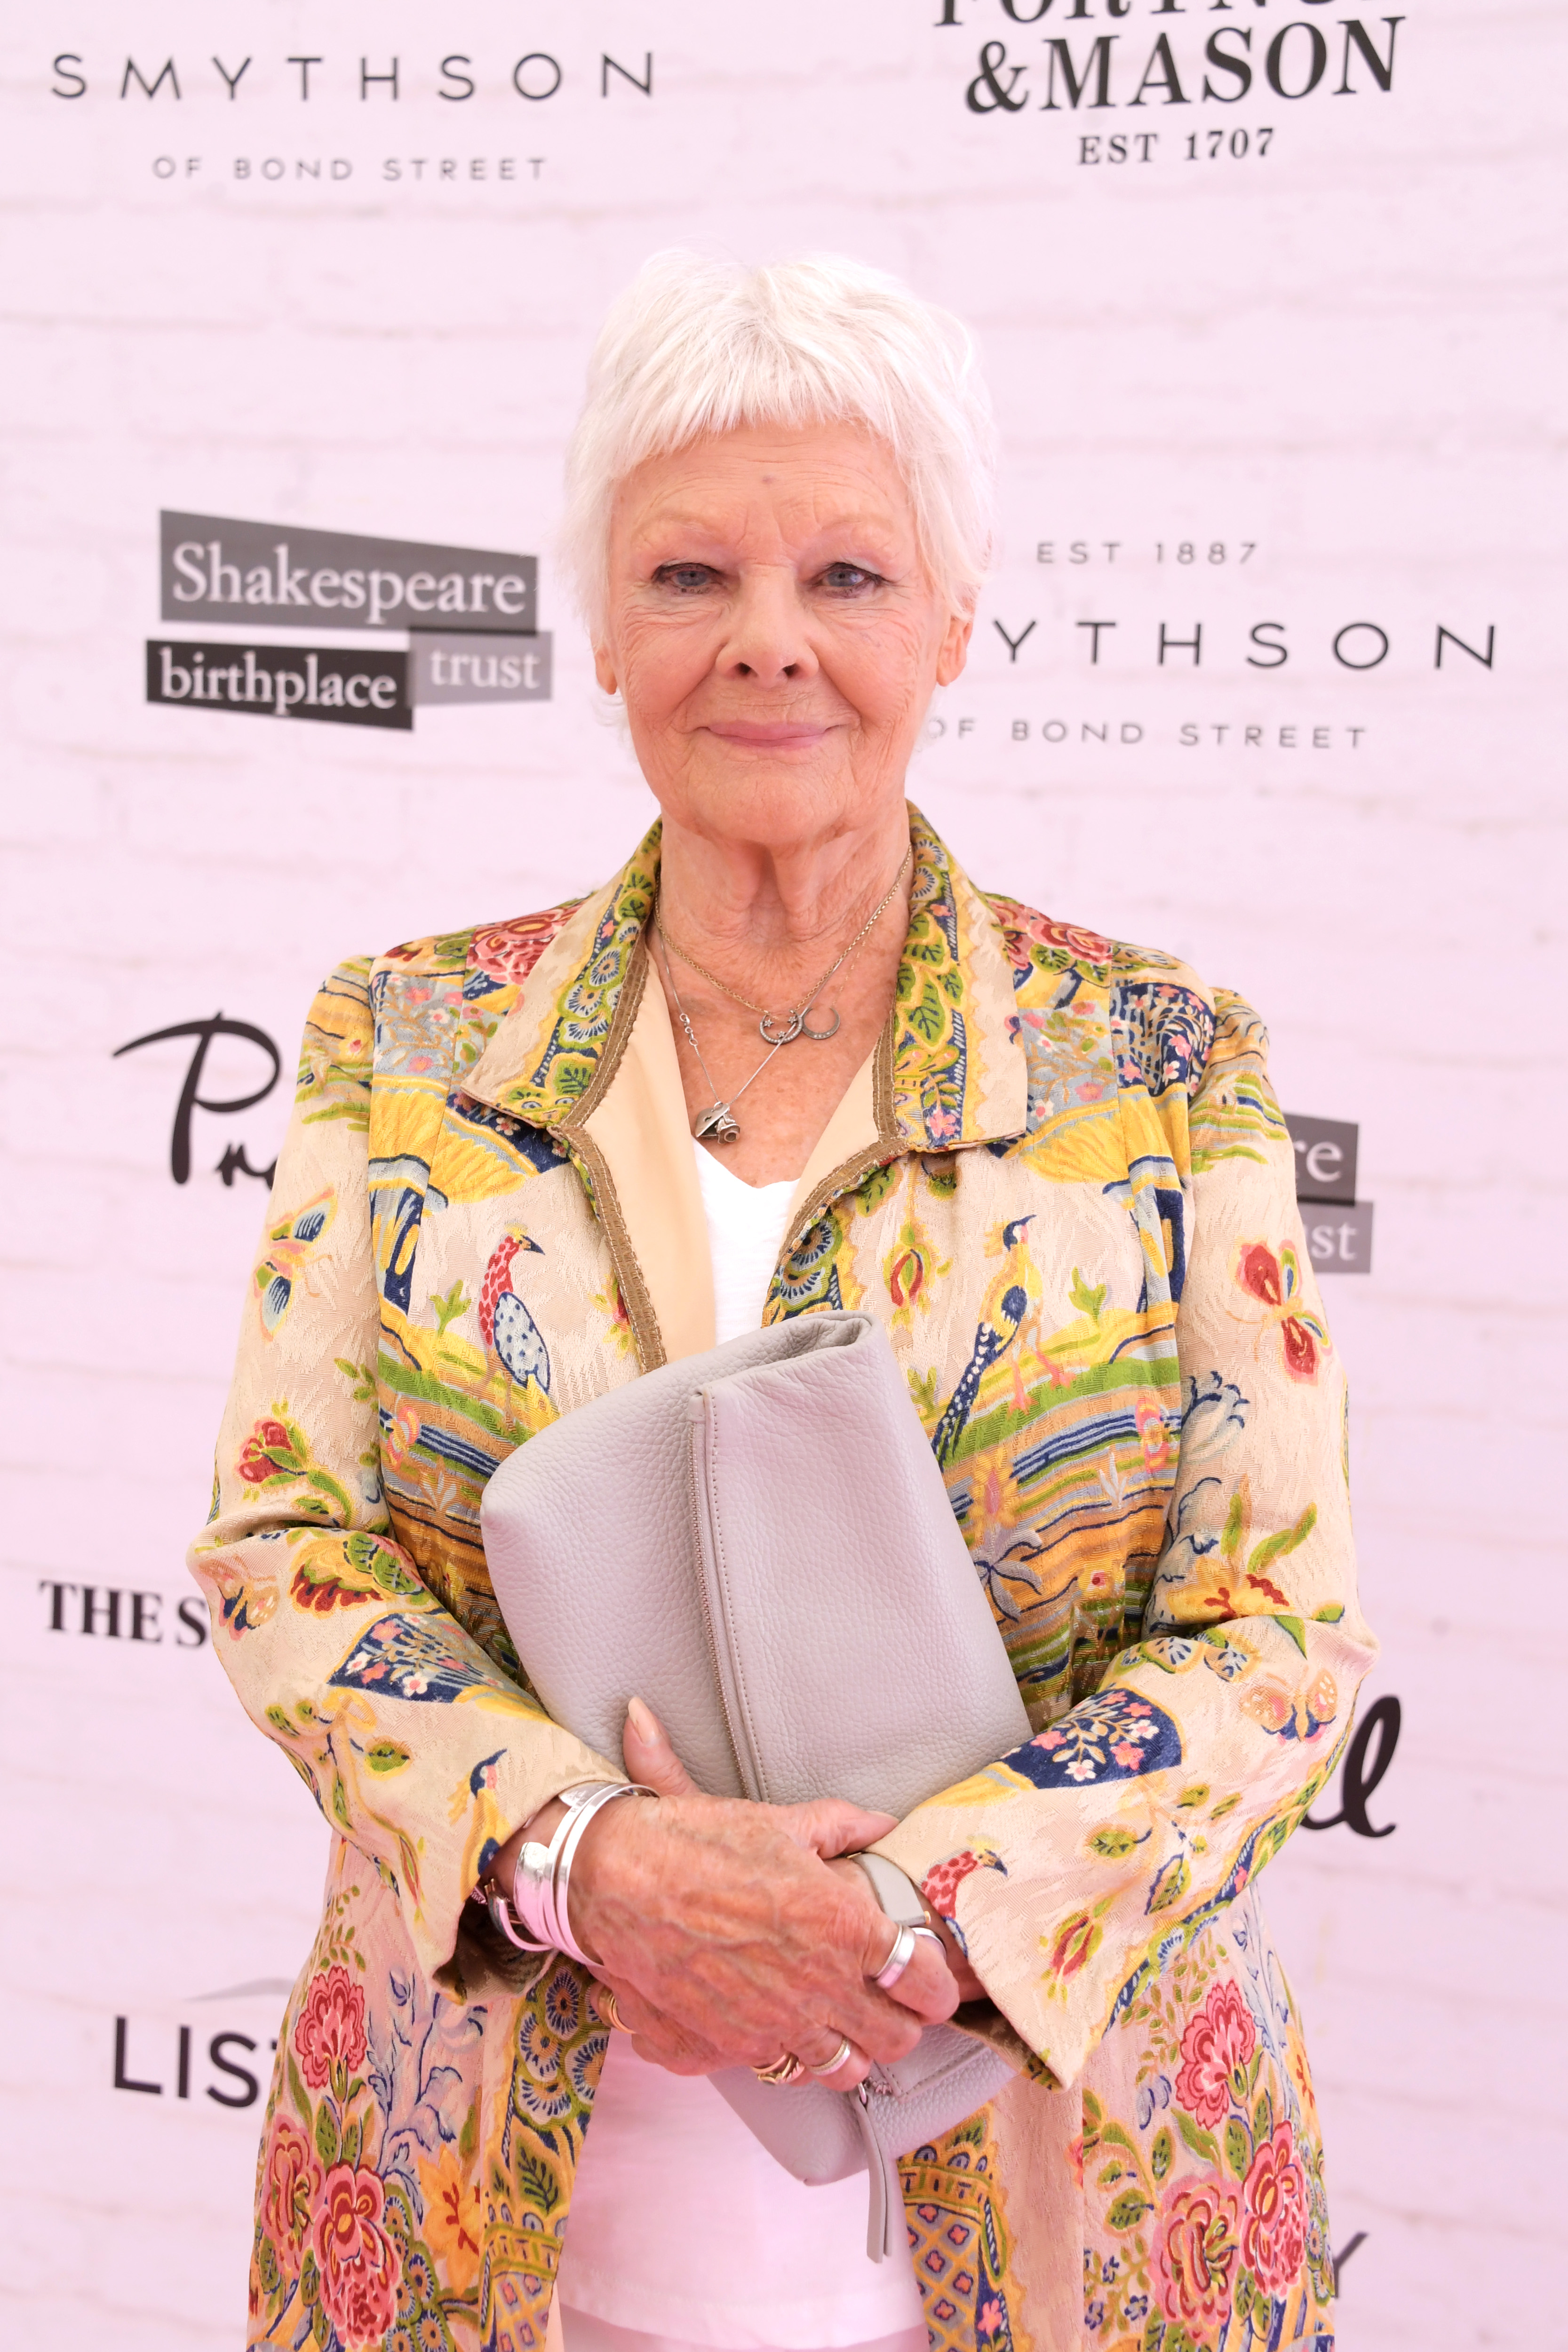 Dame Judi Dench at a Shakespeare's Birthday Lunch event in Stratford-upon-Avon, 2022 | Source: Getty Images